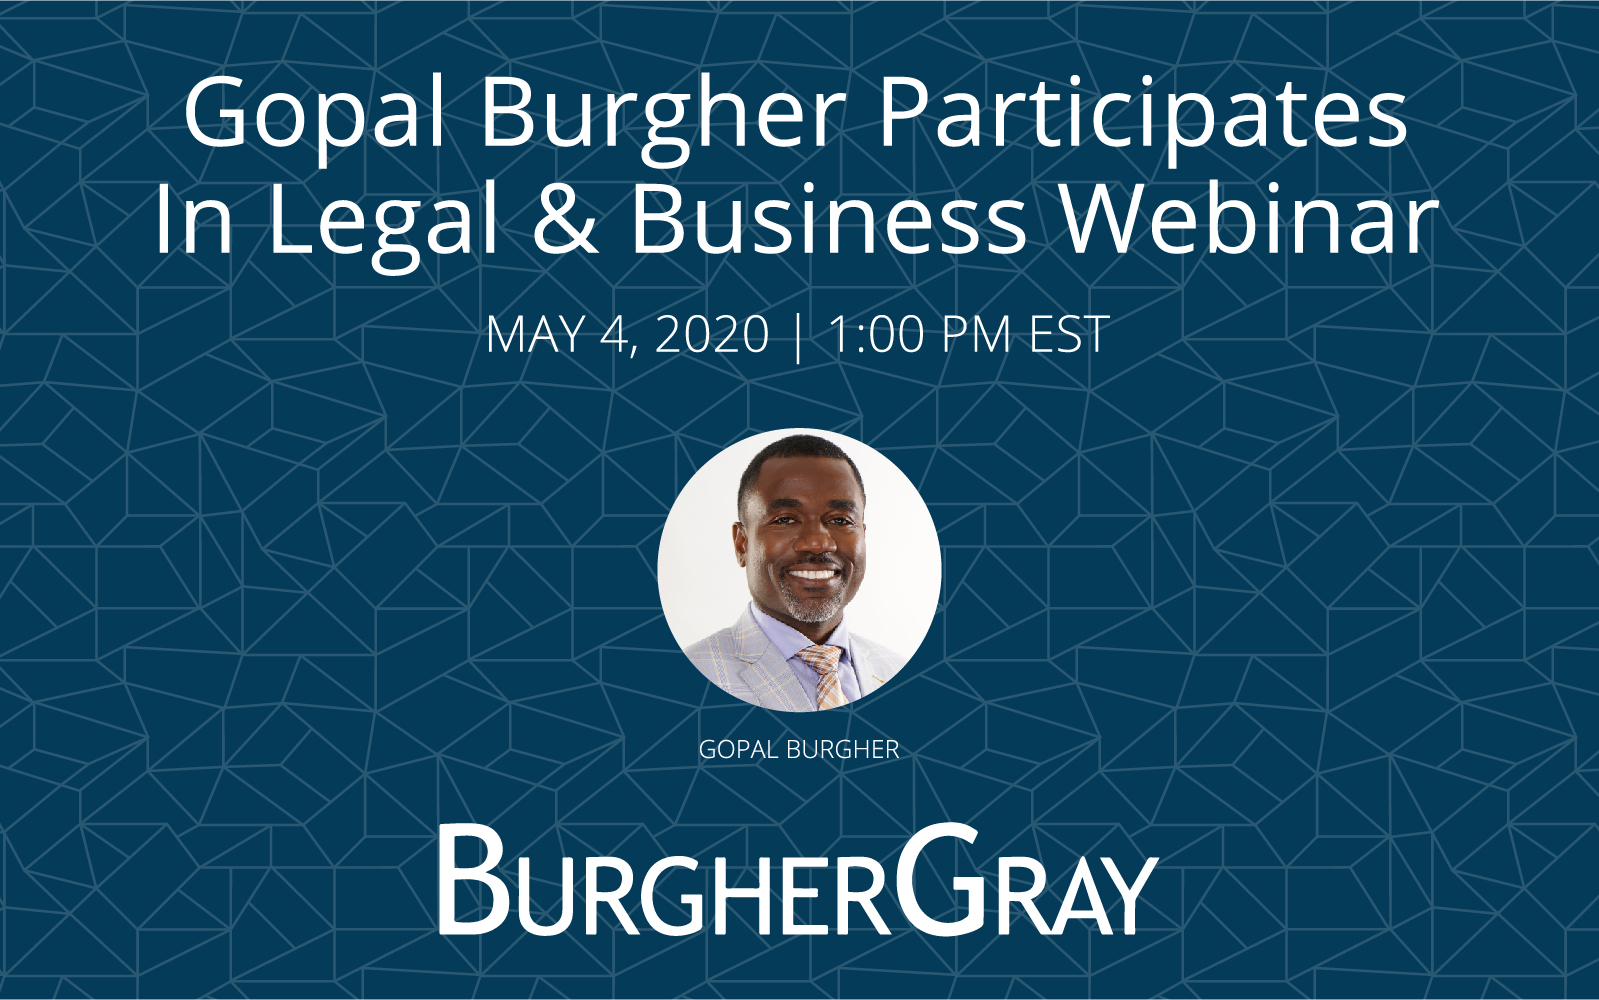 Gopal Burgher to participate in Legal & Business Webinar on May 4